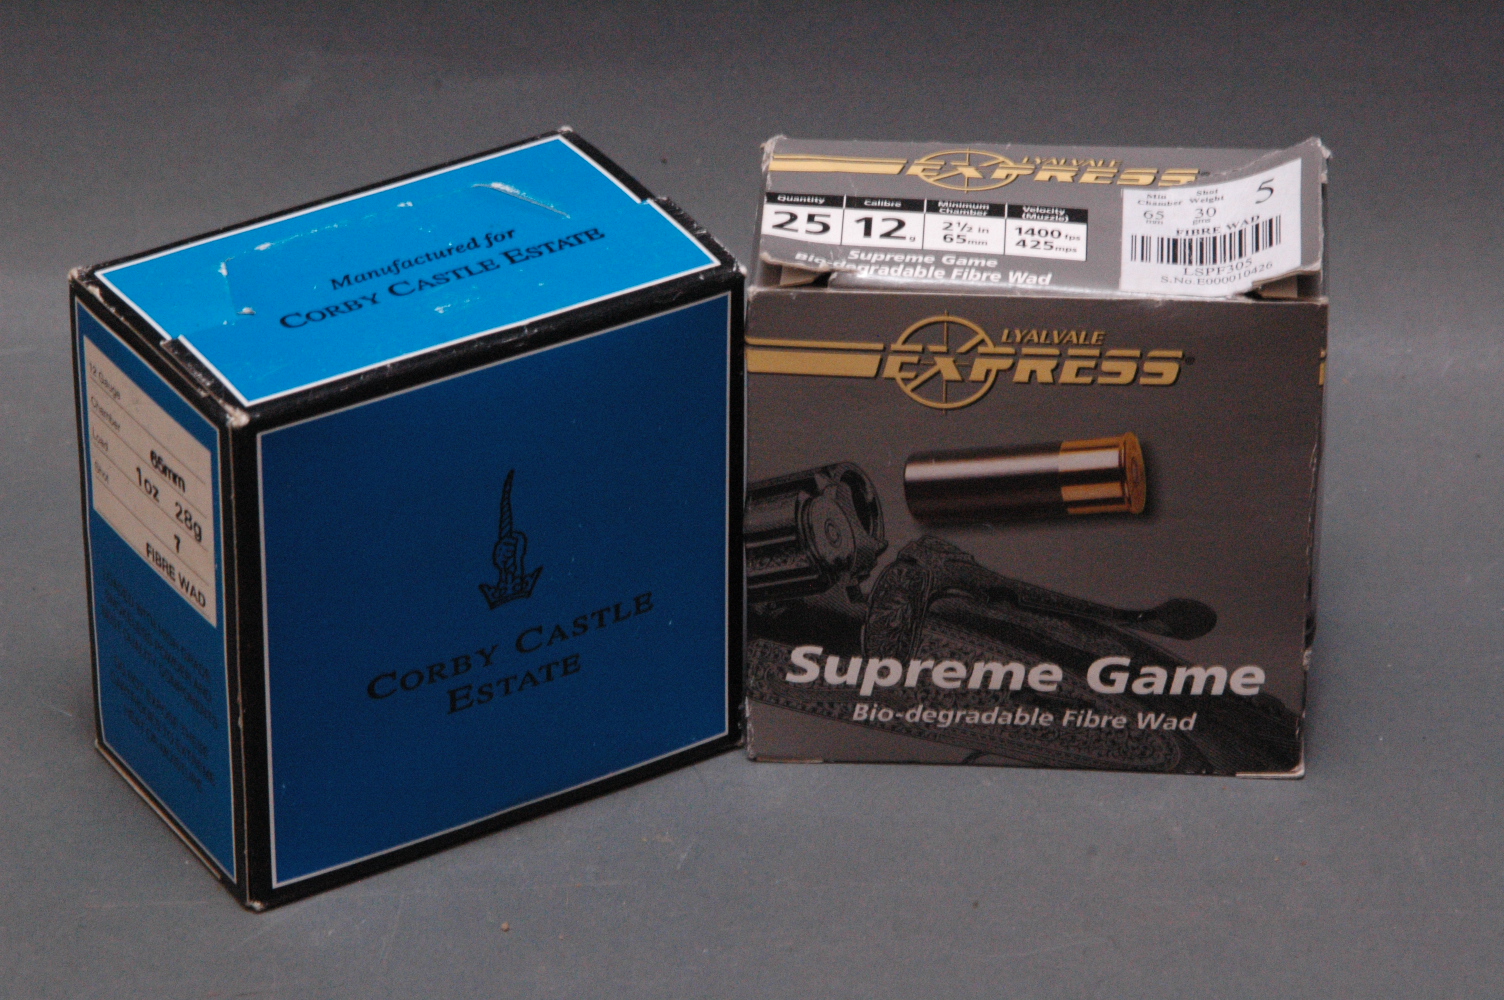 25 rounds of Express Supreme Game 12 bore cartridges, 2.